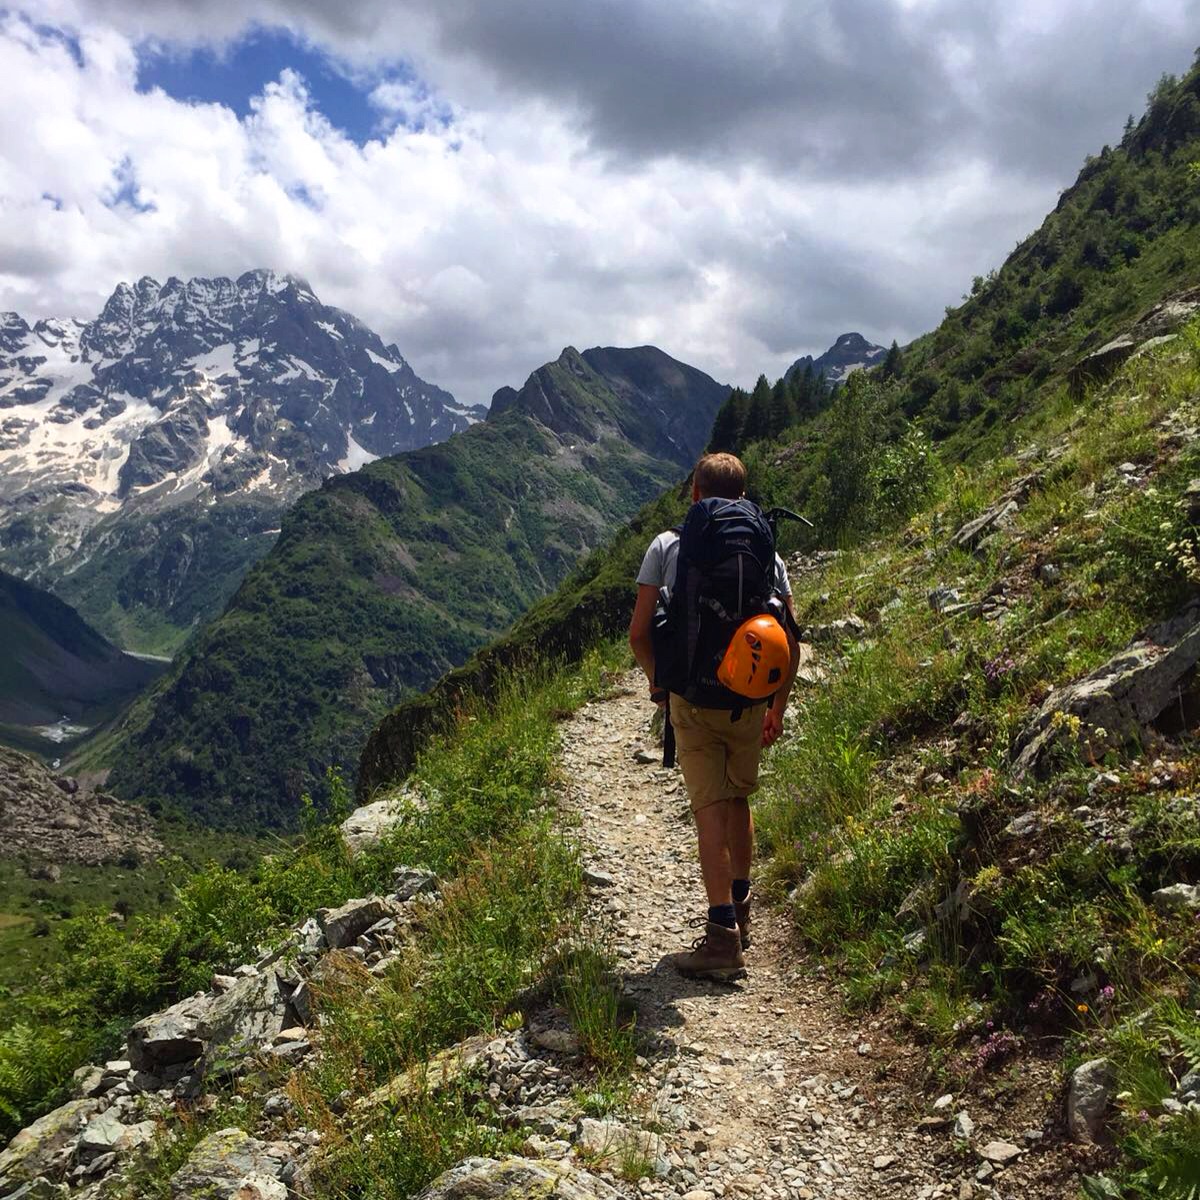 Summer Multi Activity Holidays, Mountain Biking Holidays, Mountaineering and Alpinism Holidays, Road Cycling Holidays, Trail and Fell running Events and Trips, Walking Holidays, White Water Kayaking Holidays - Andy Hibbert